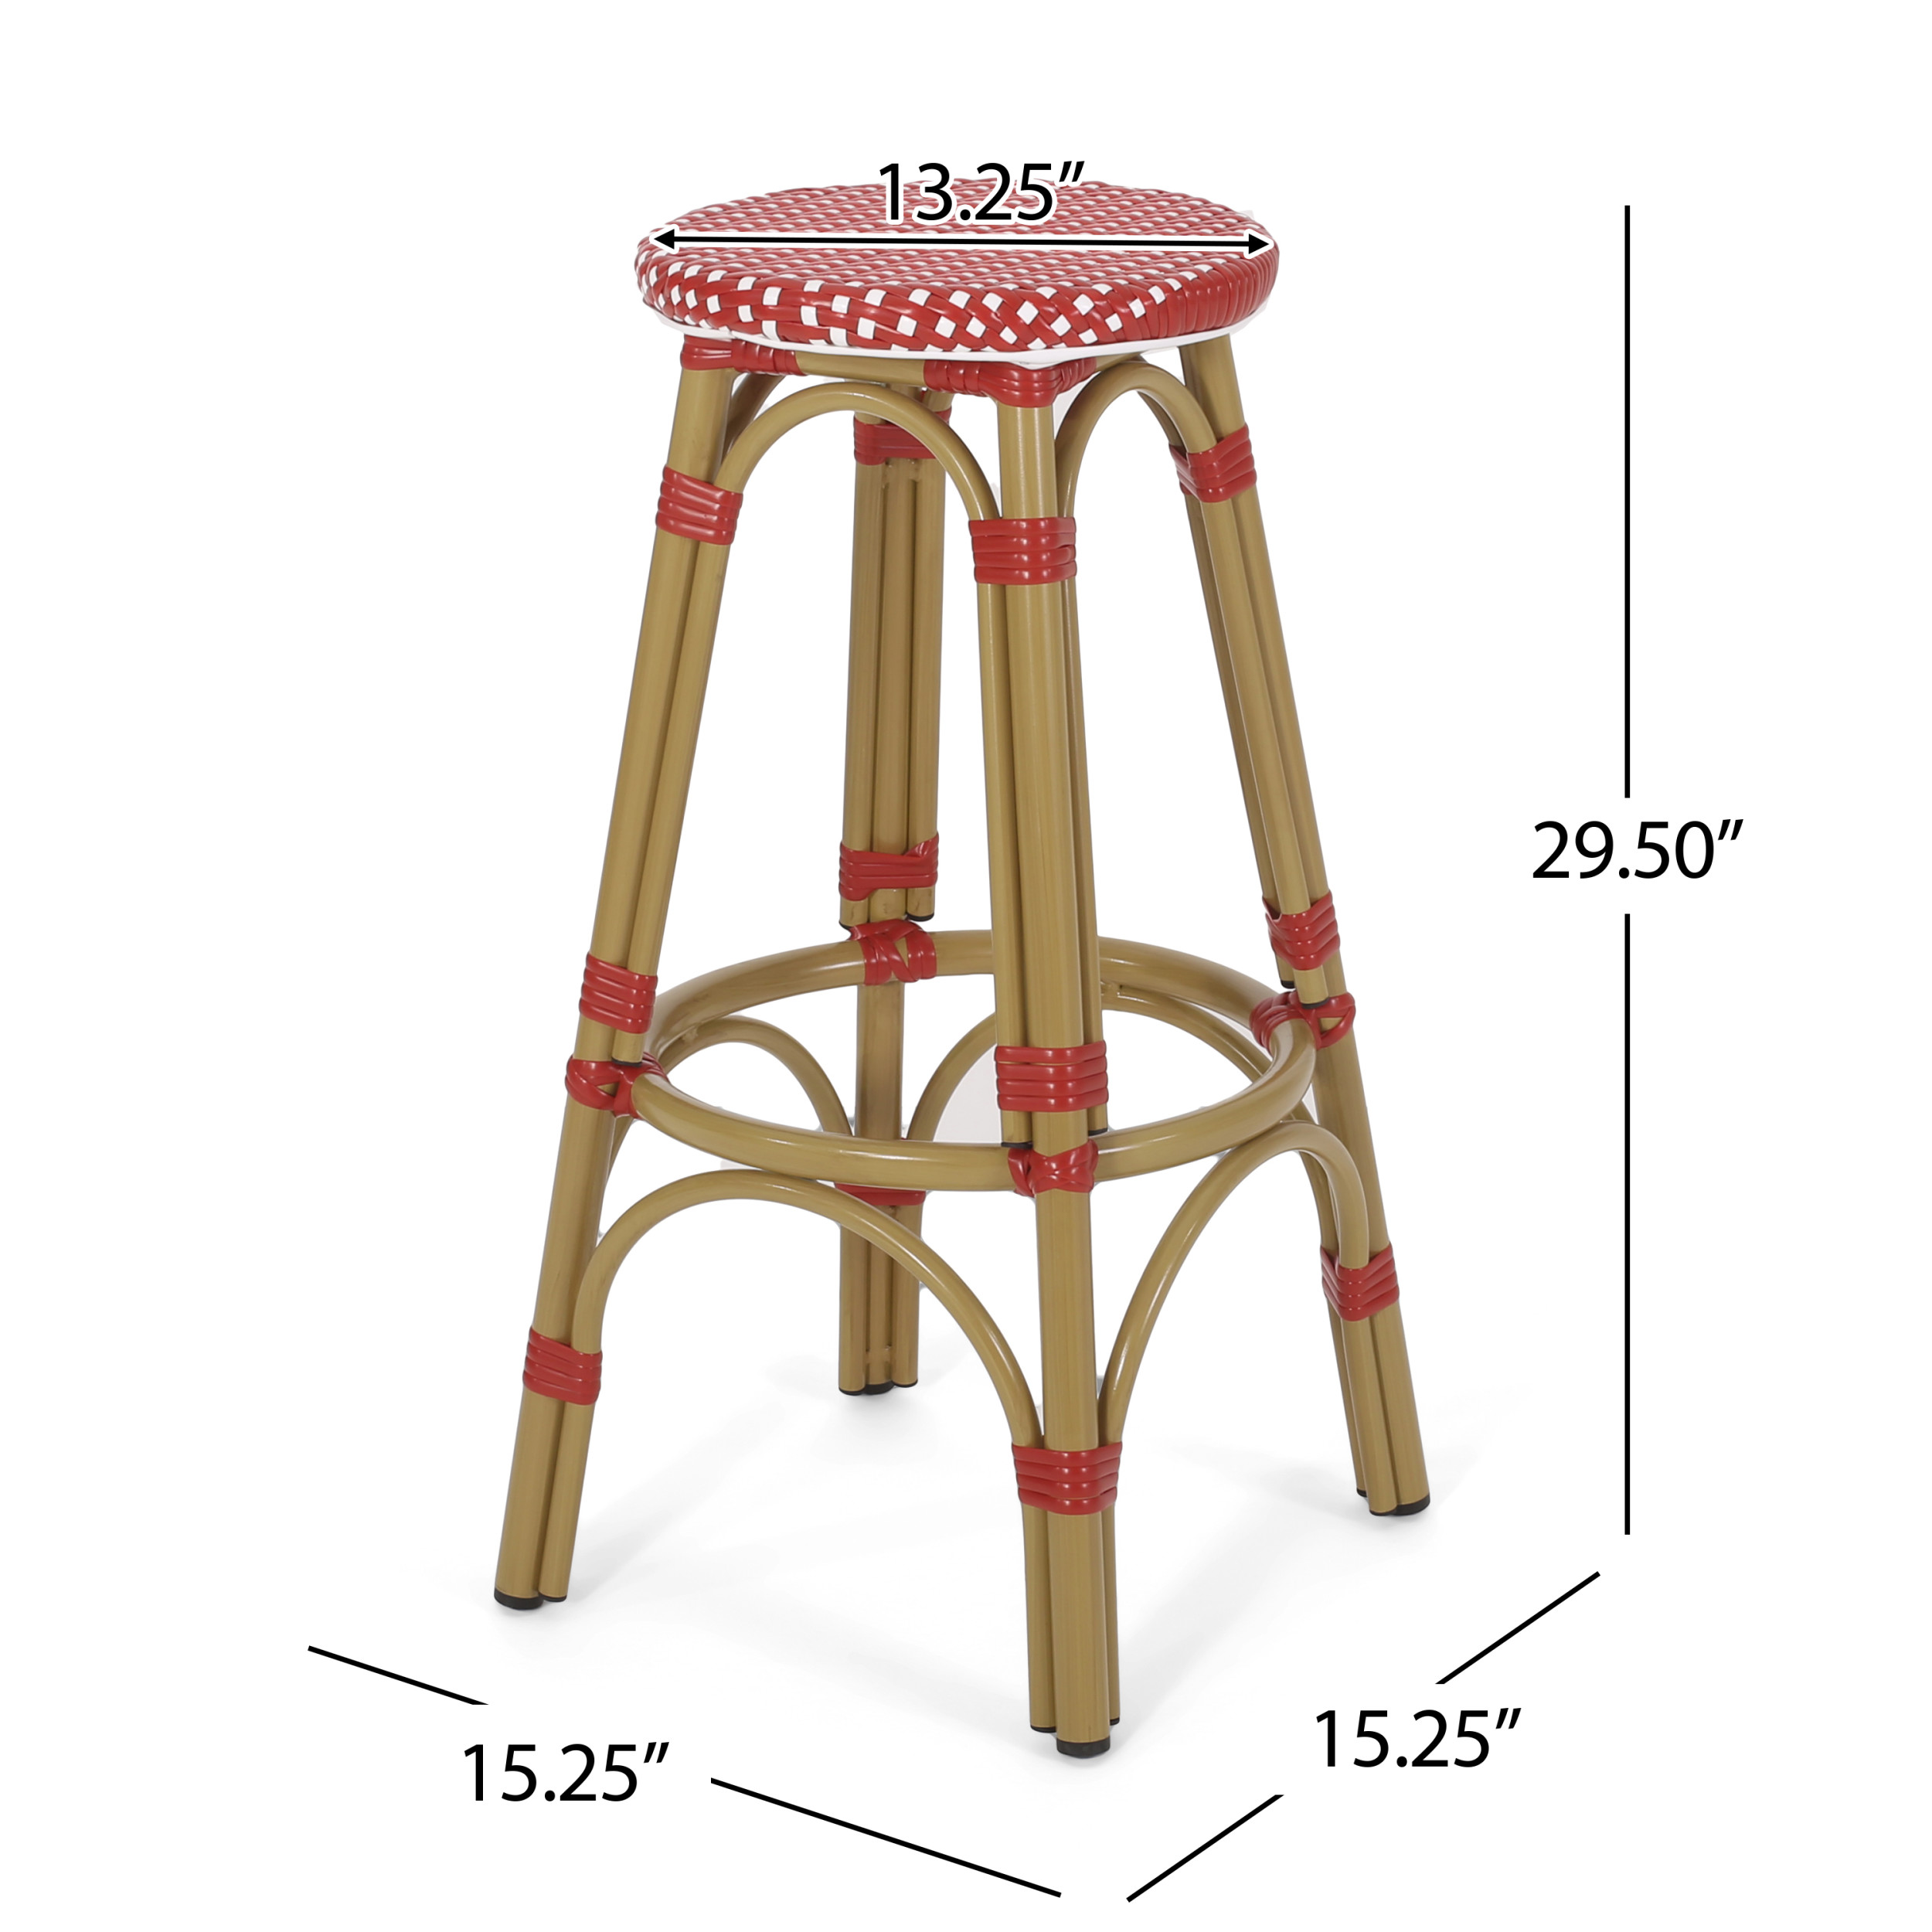 Wilbur Aluminum and Wicker Outdoor 29.5 Inch Barstools, Set of 2, Red, White, and Bamboo Finish - image 3 of 7